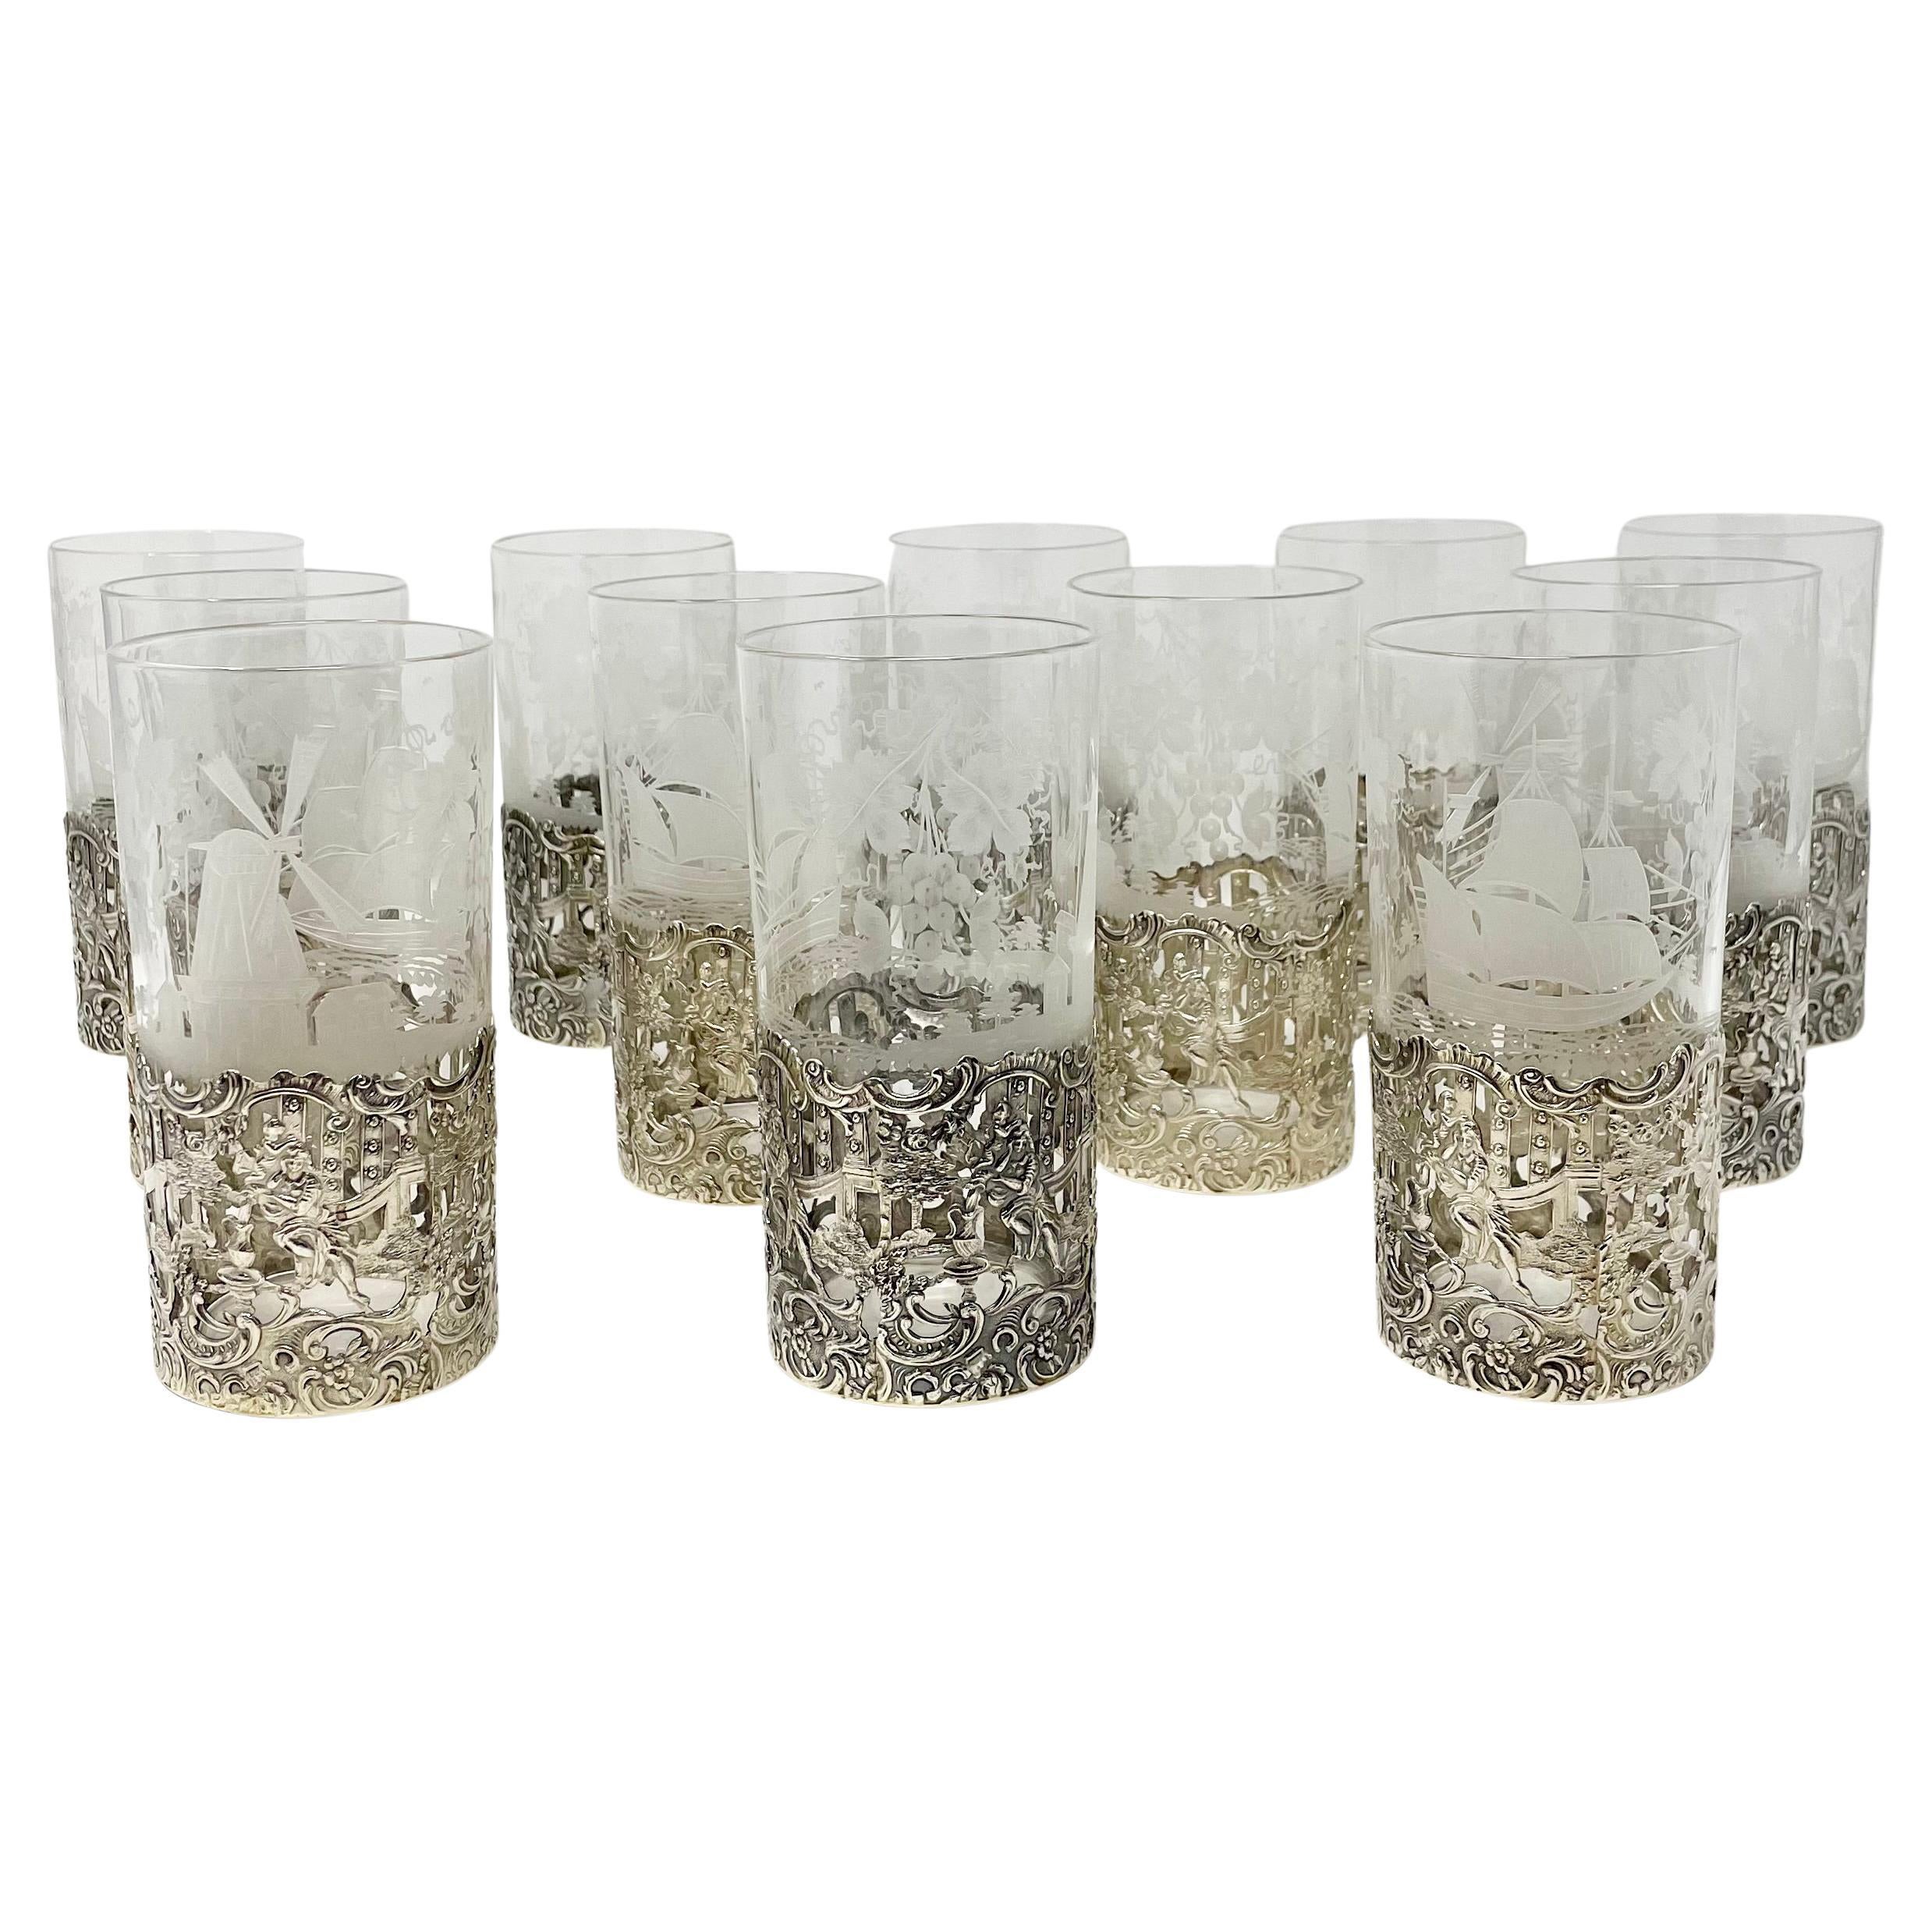 Set of 12 Antique American Sterling Silver Mounted Hand-Etched Highball Glasses.